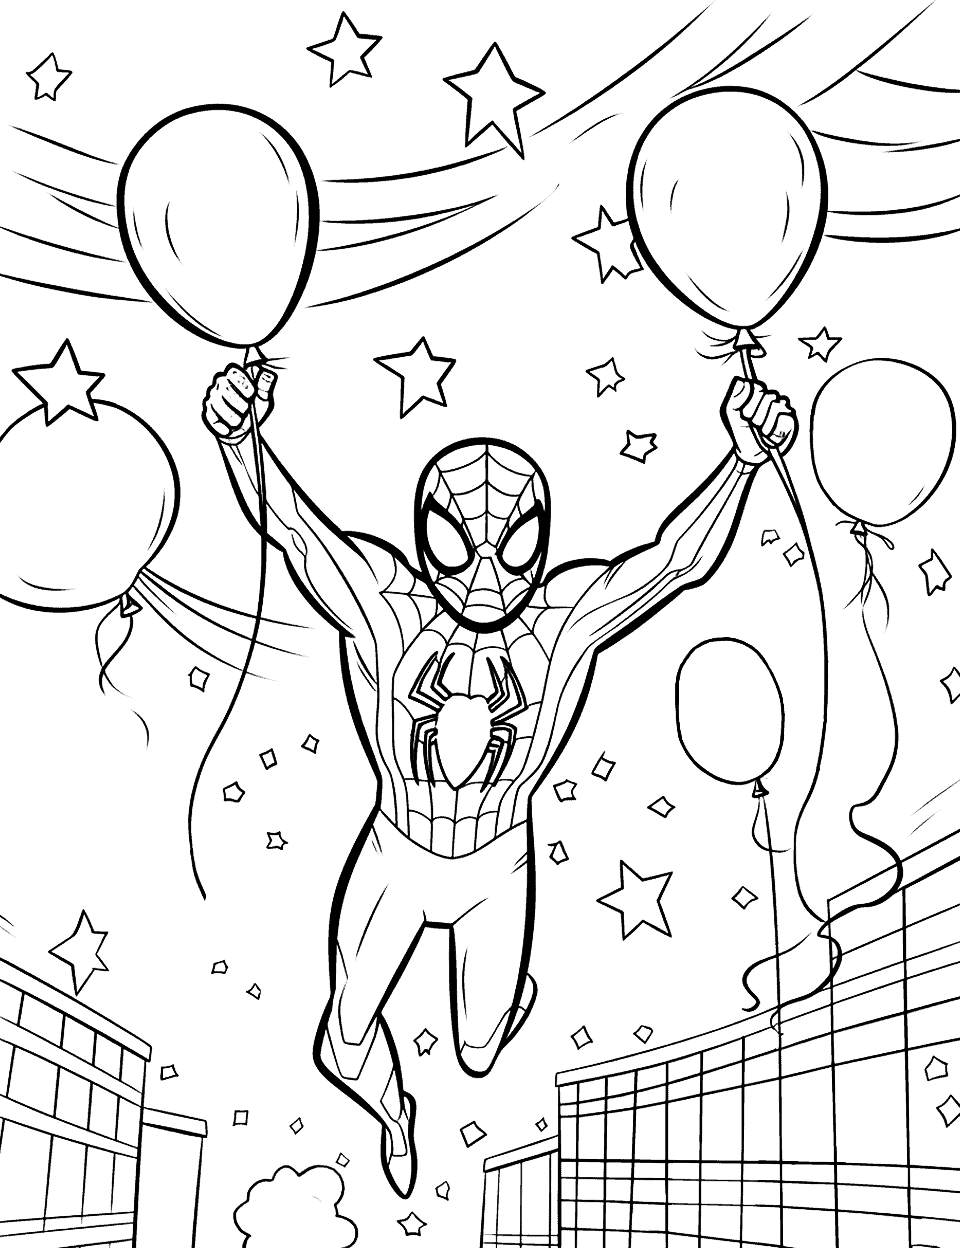 Spiderman's Birthday Web Happy Coloring Page - Spiderman swinging from web to web, with birthday banners in the backdrop.